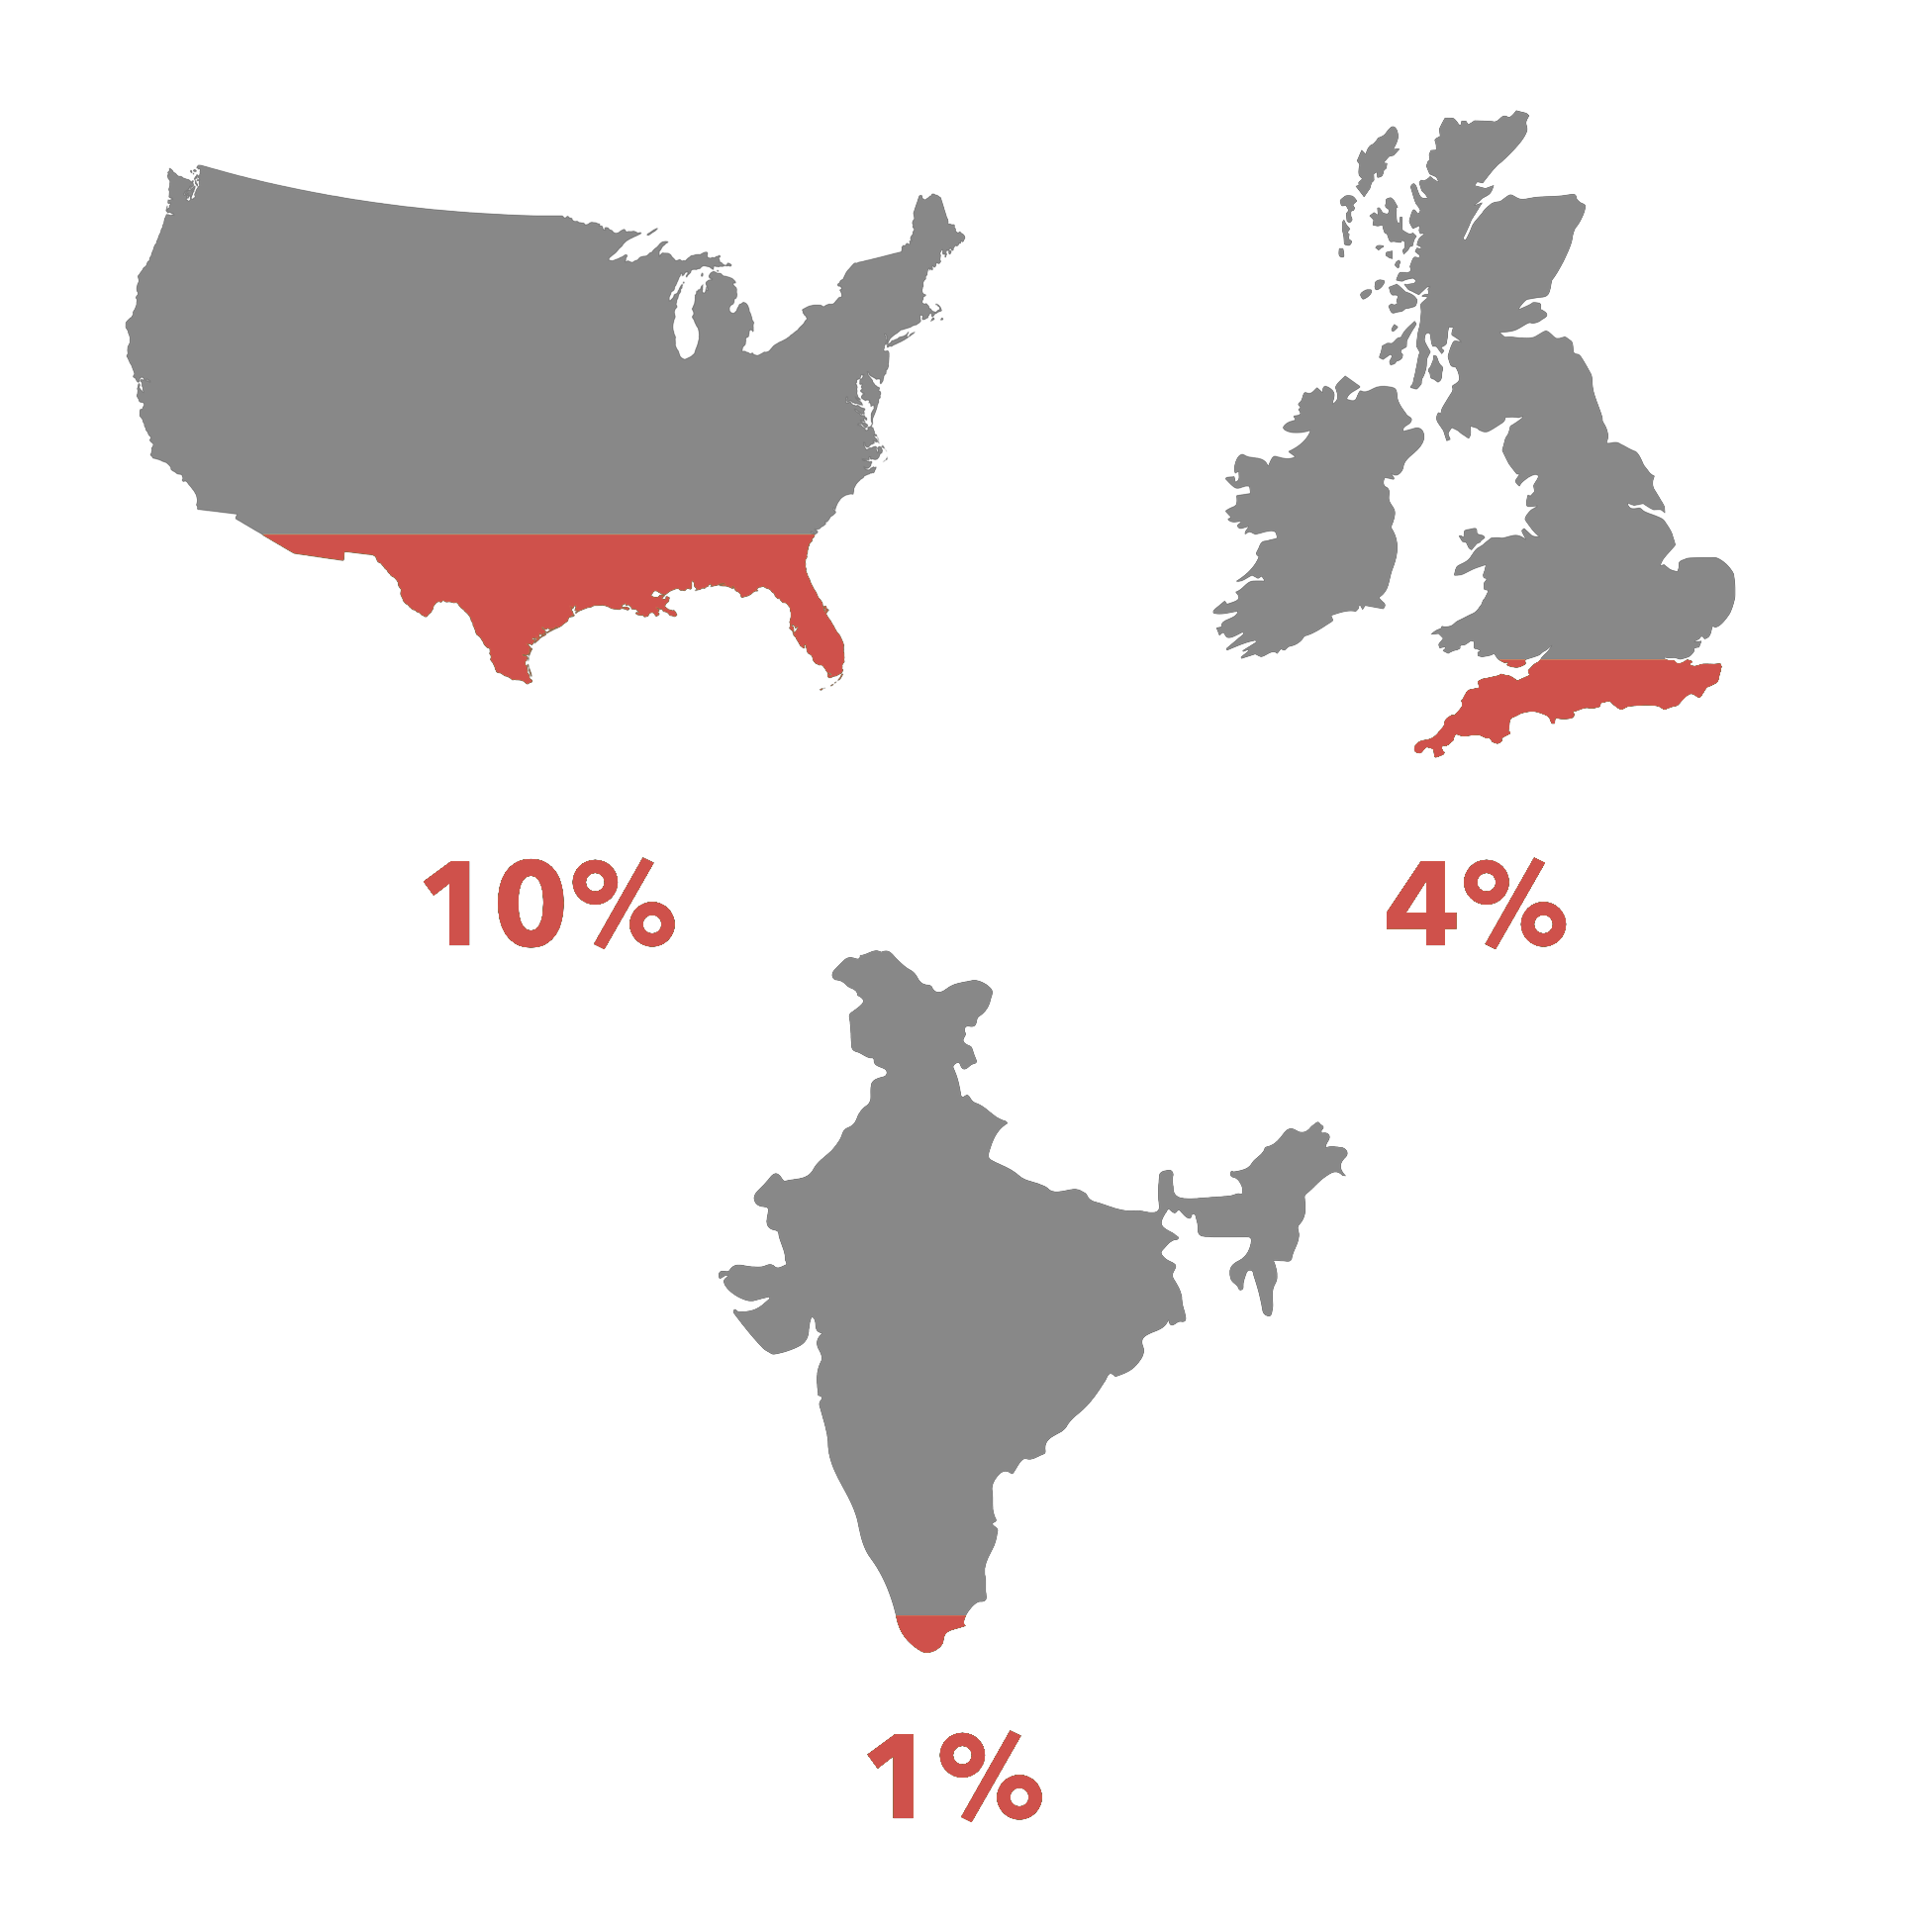 Literacy rates around the world. One percent in India, four percent in the UK, ten percent in USA.